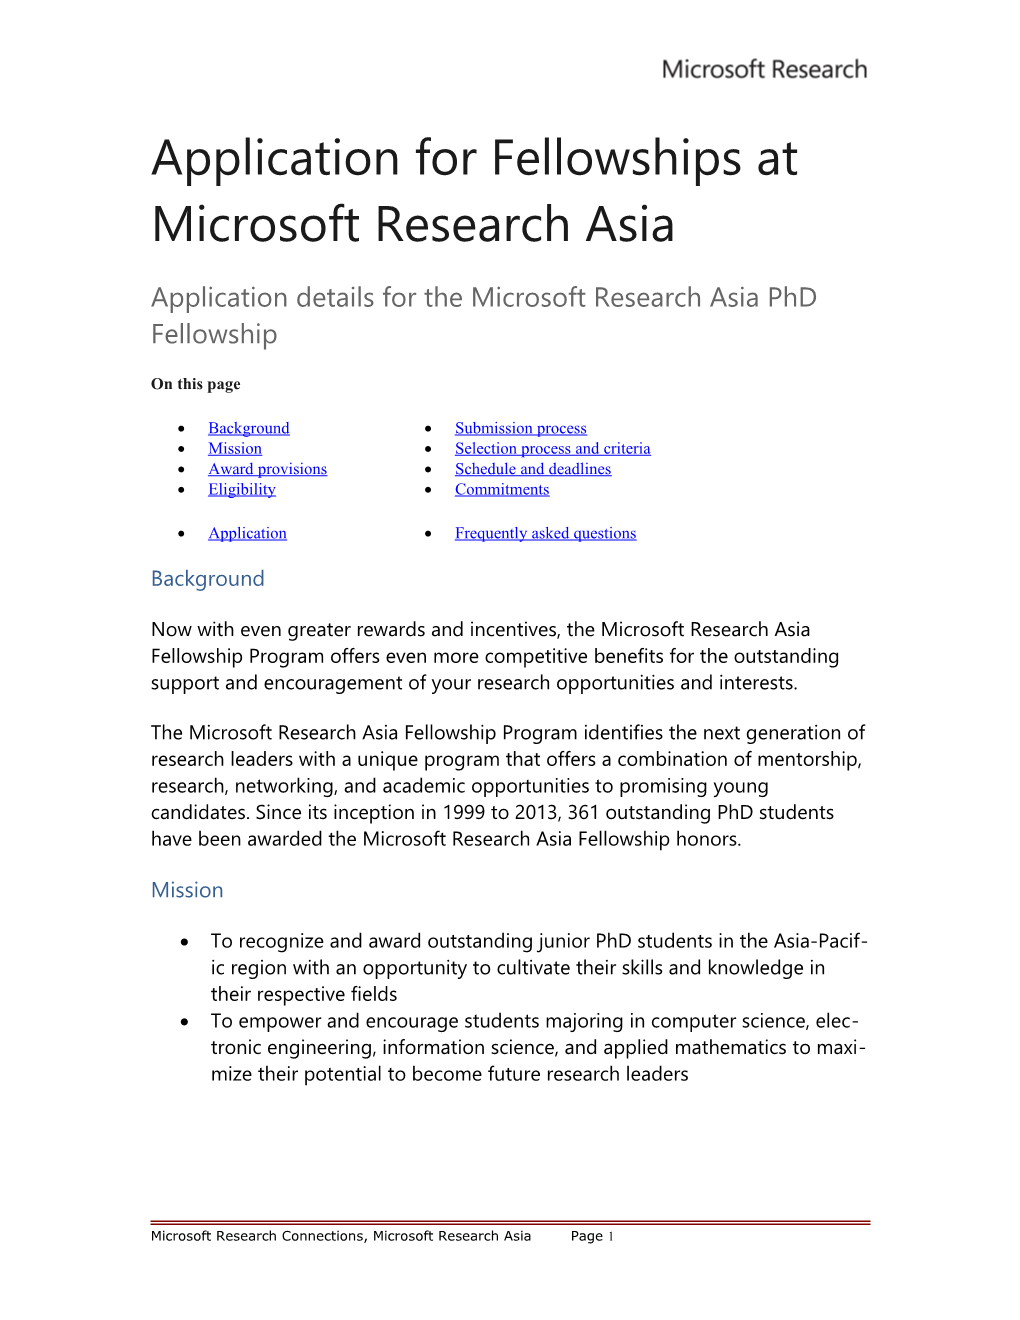 Application for Fellowships at Microsoft Research Asia